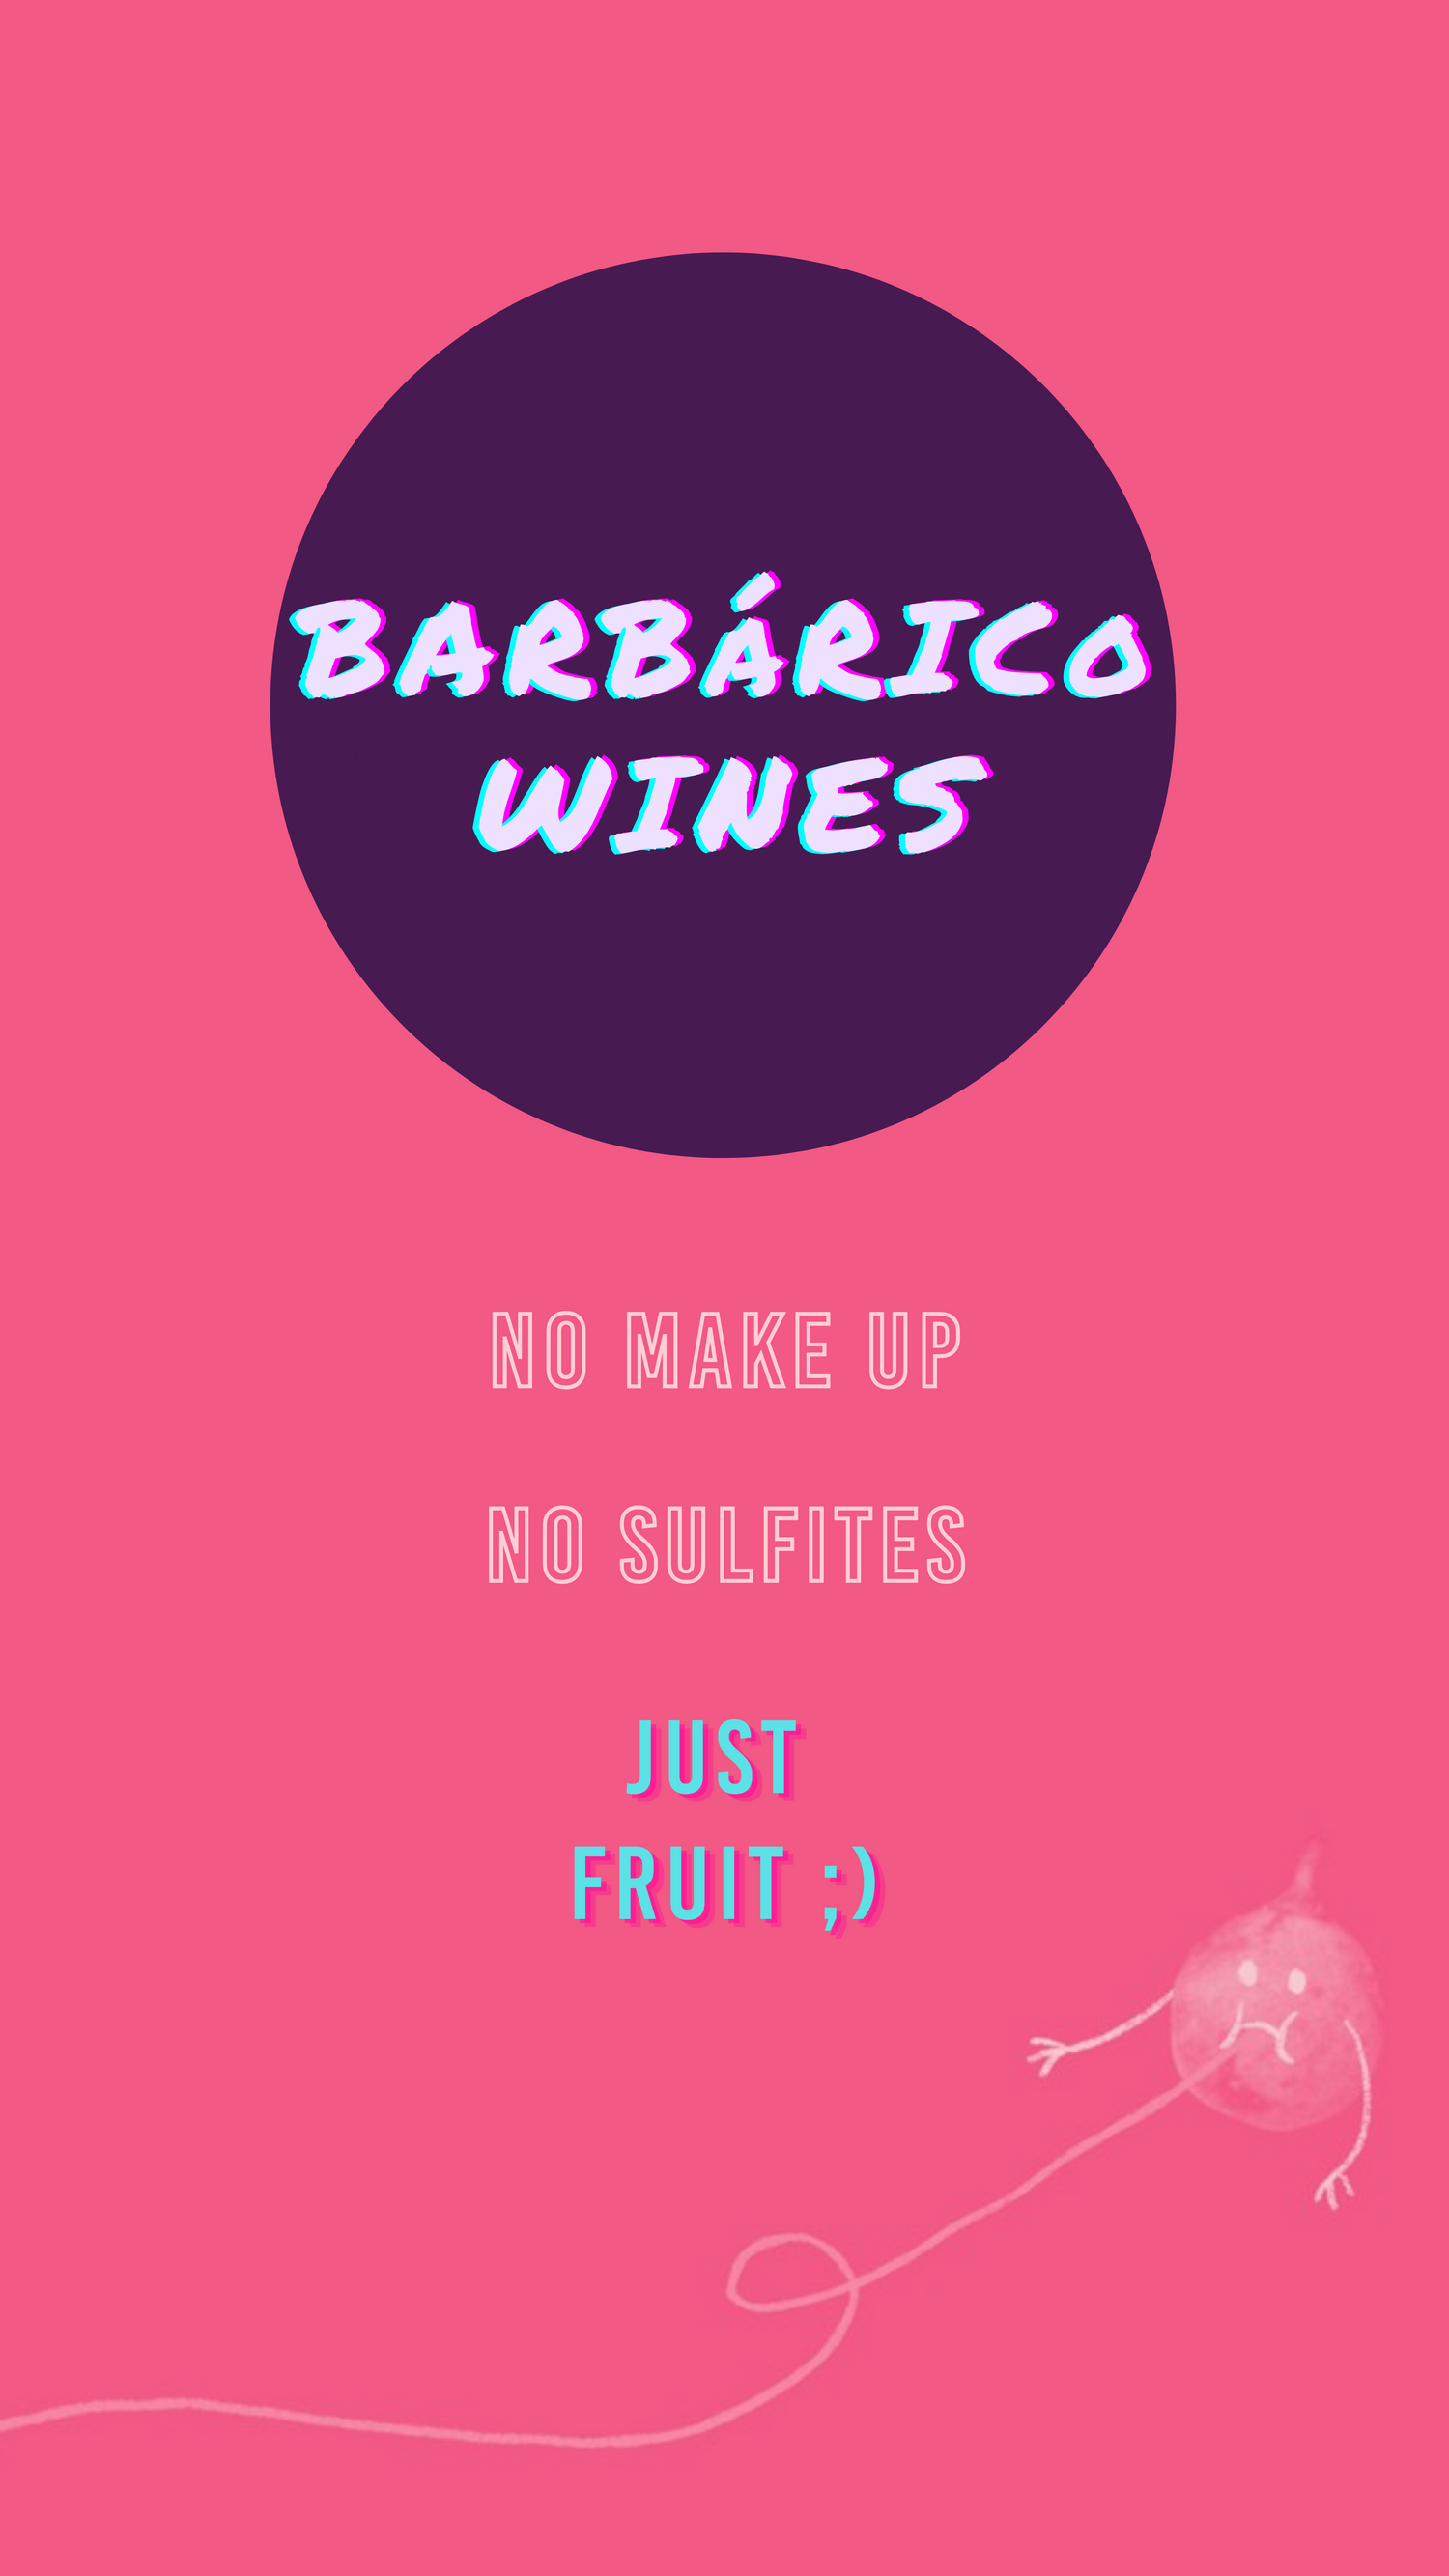 Barbarico Wines our brand